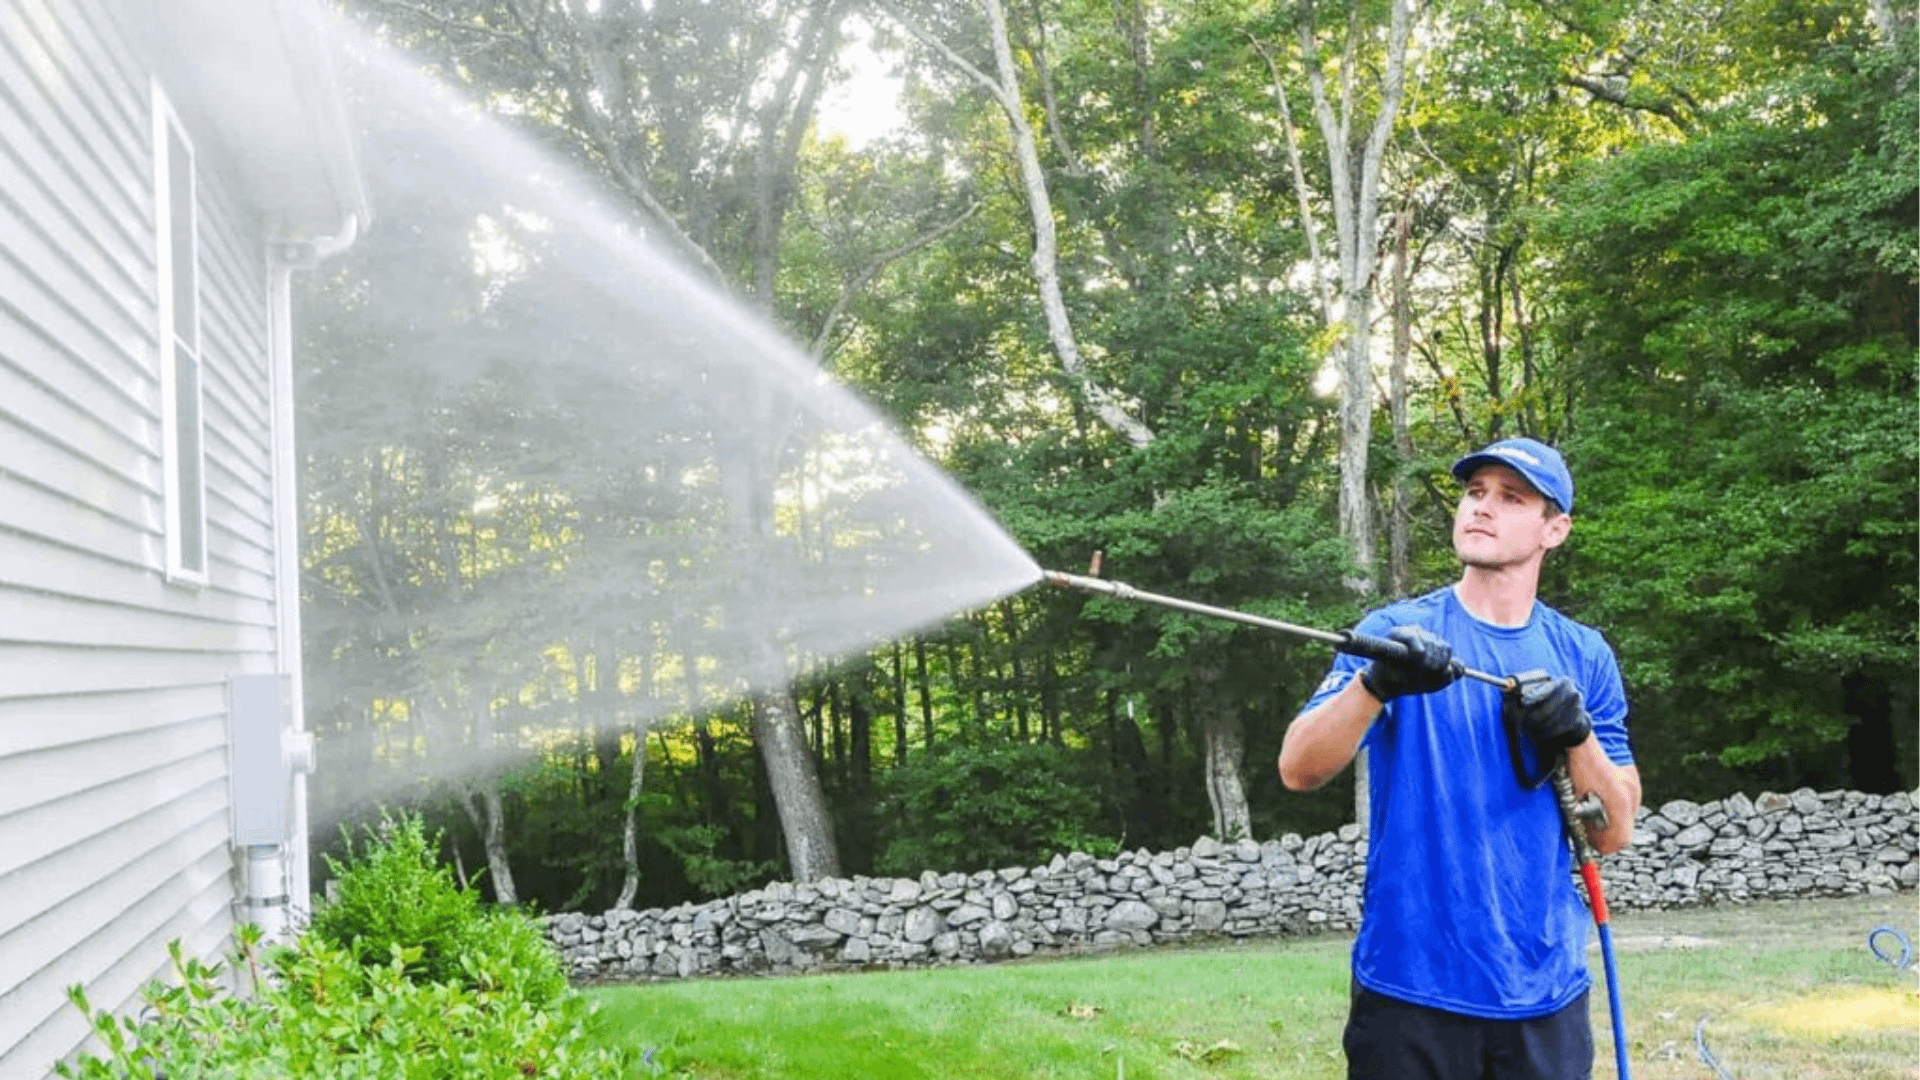 A man is wearing a hat and a blue t-shirt while softwashing a vinyl house as part of the house washing process